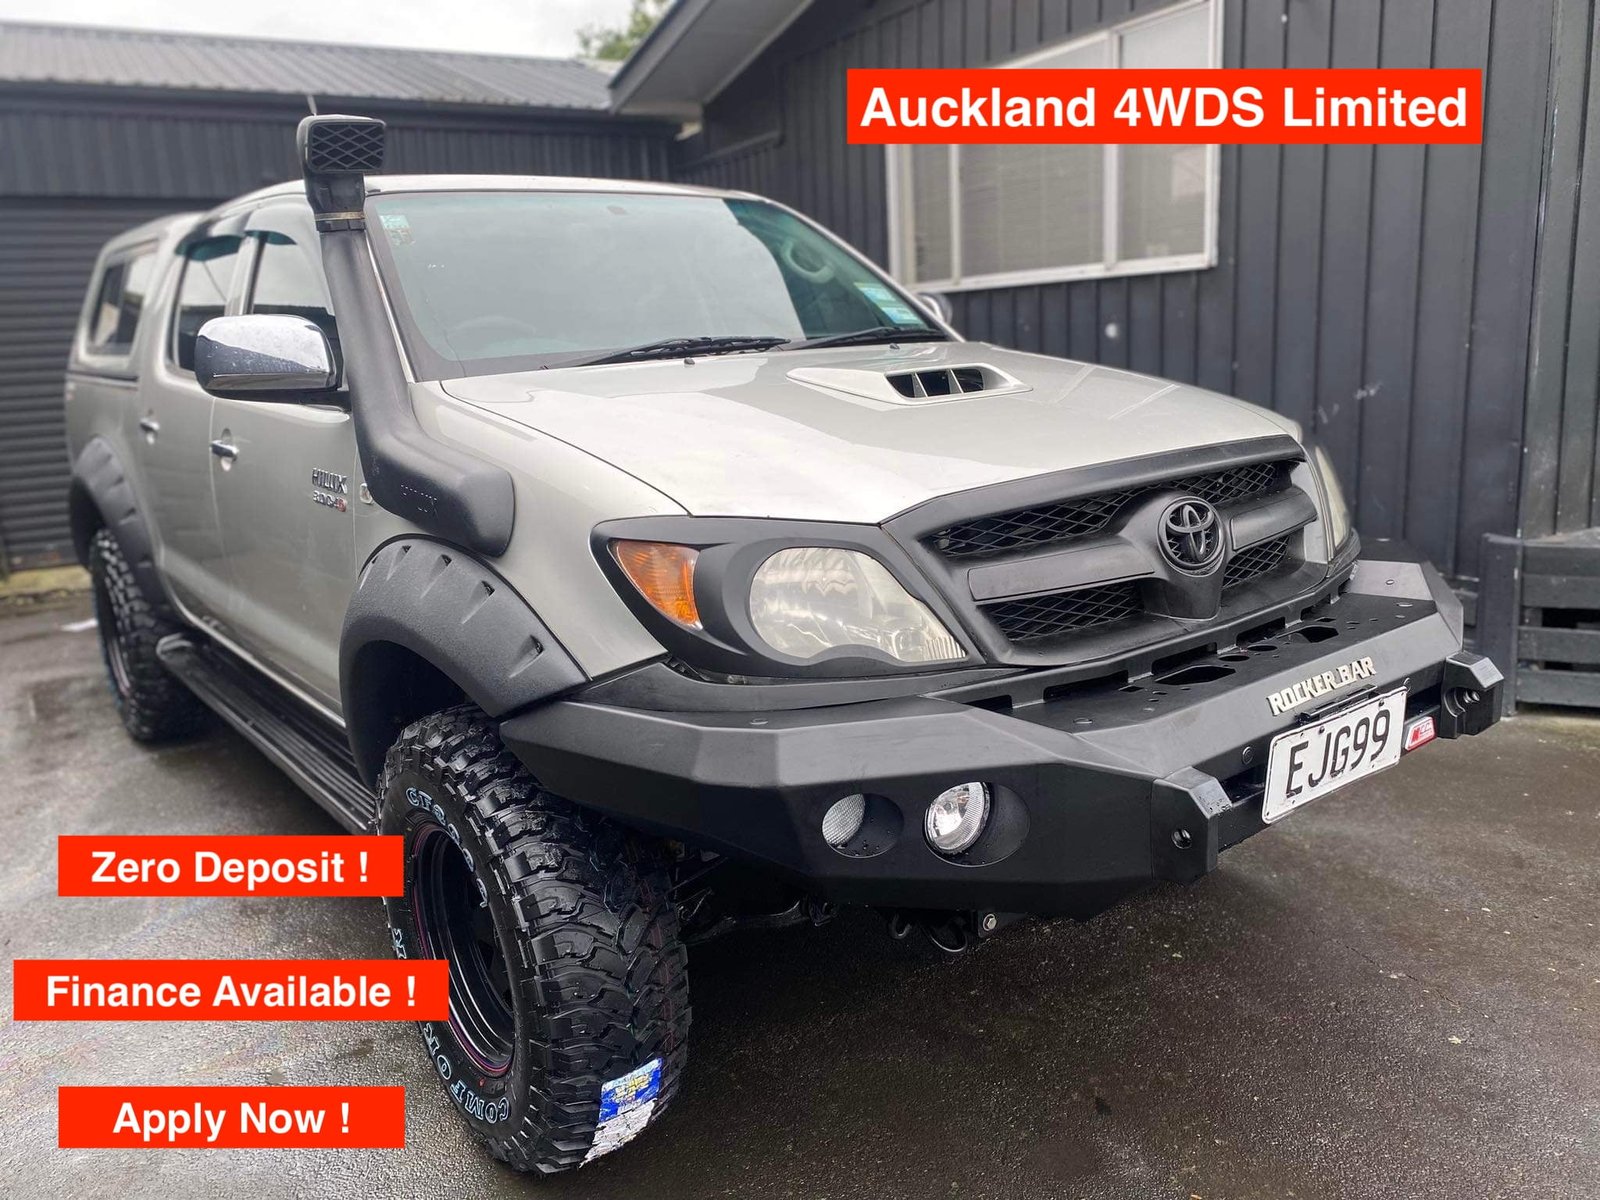 🔥 2008 Toyota Hilux 4wd SR5 1KD🔥 - Auckland 4WDS